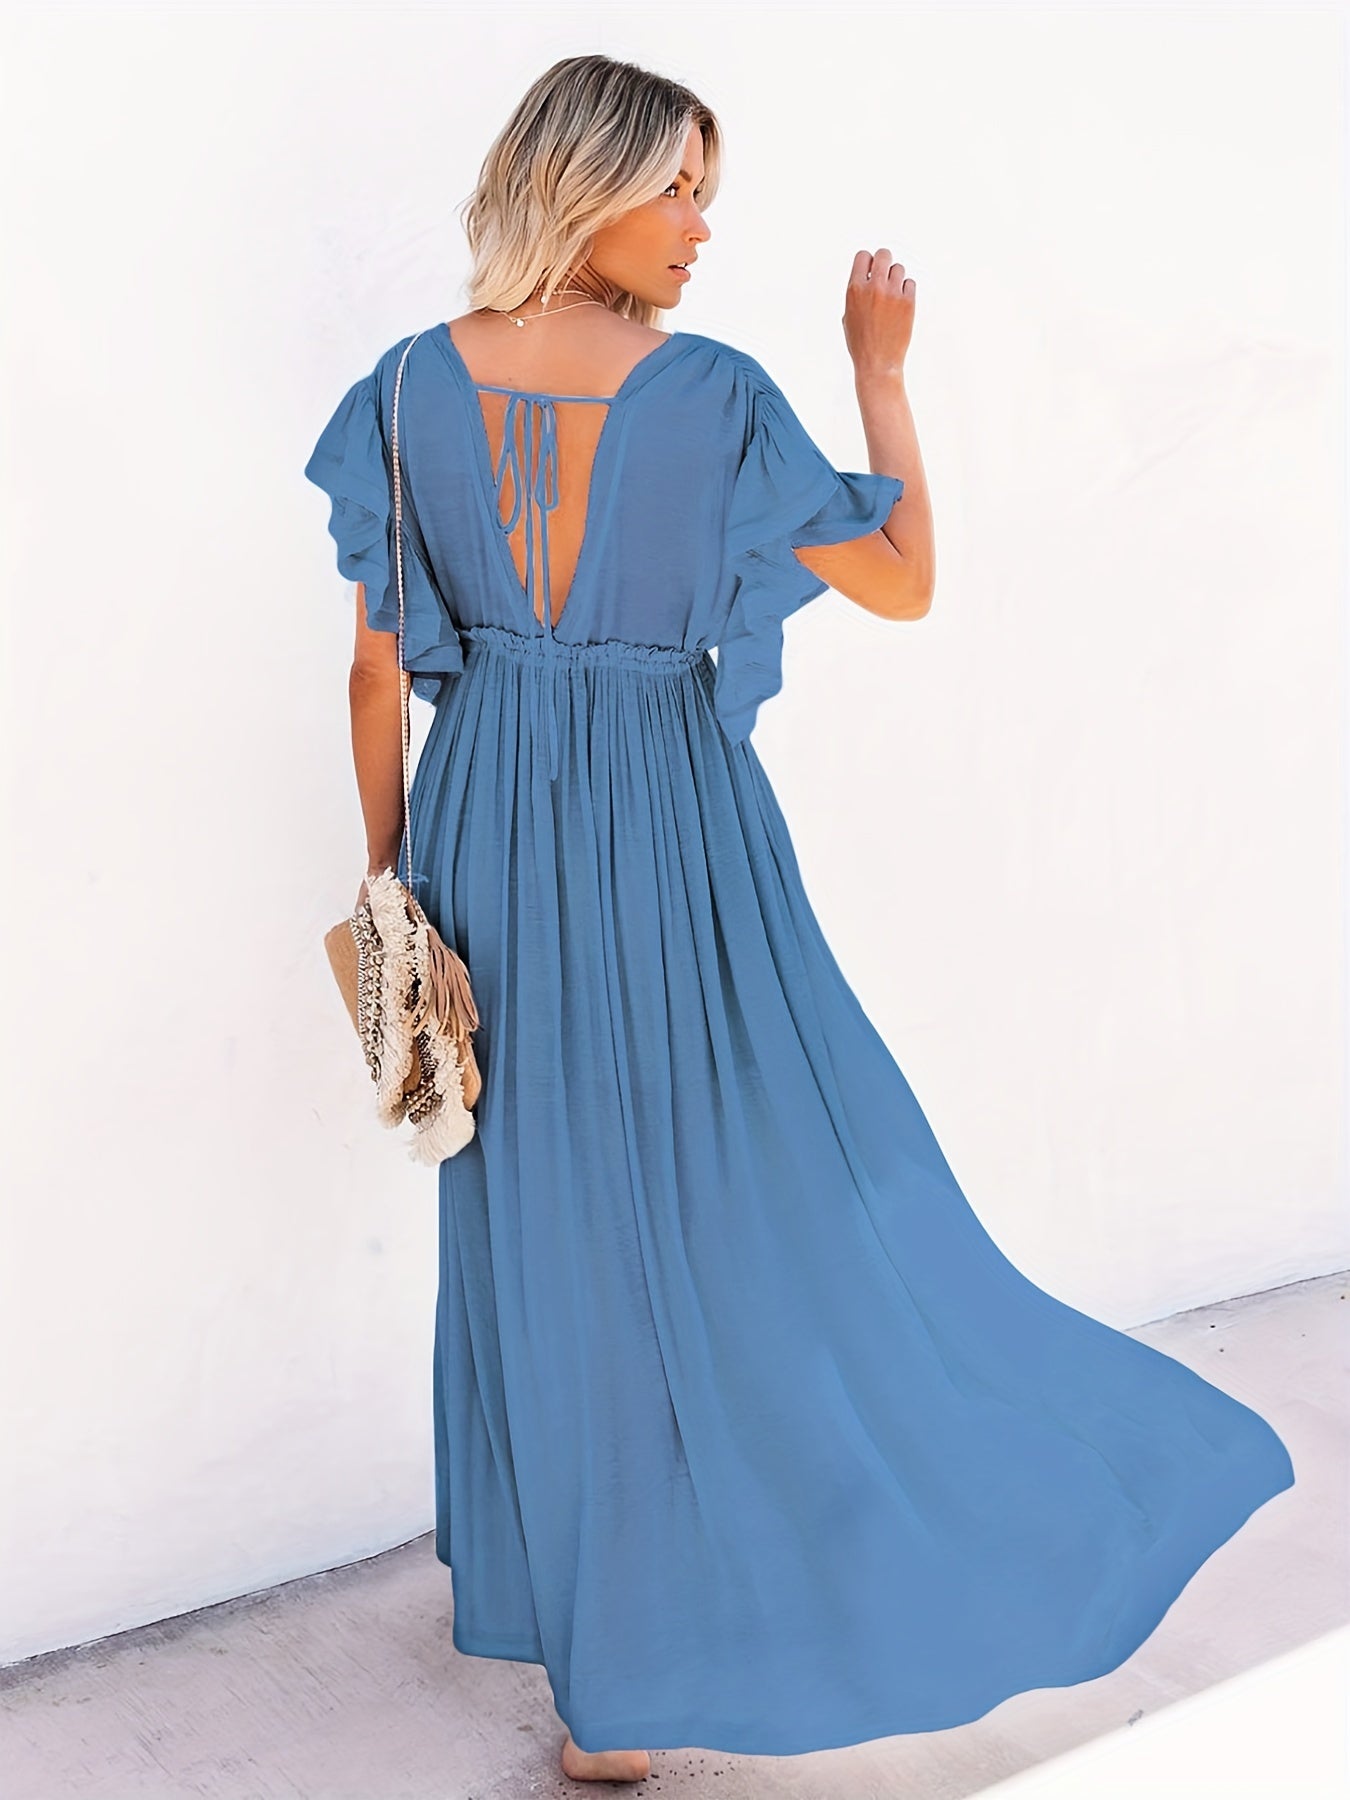 「lovevop」Ruched Plunging Dress, Vacation Beach Solid Drawstring Ruffle Trim Maxi Dress, Women's Clothing